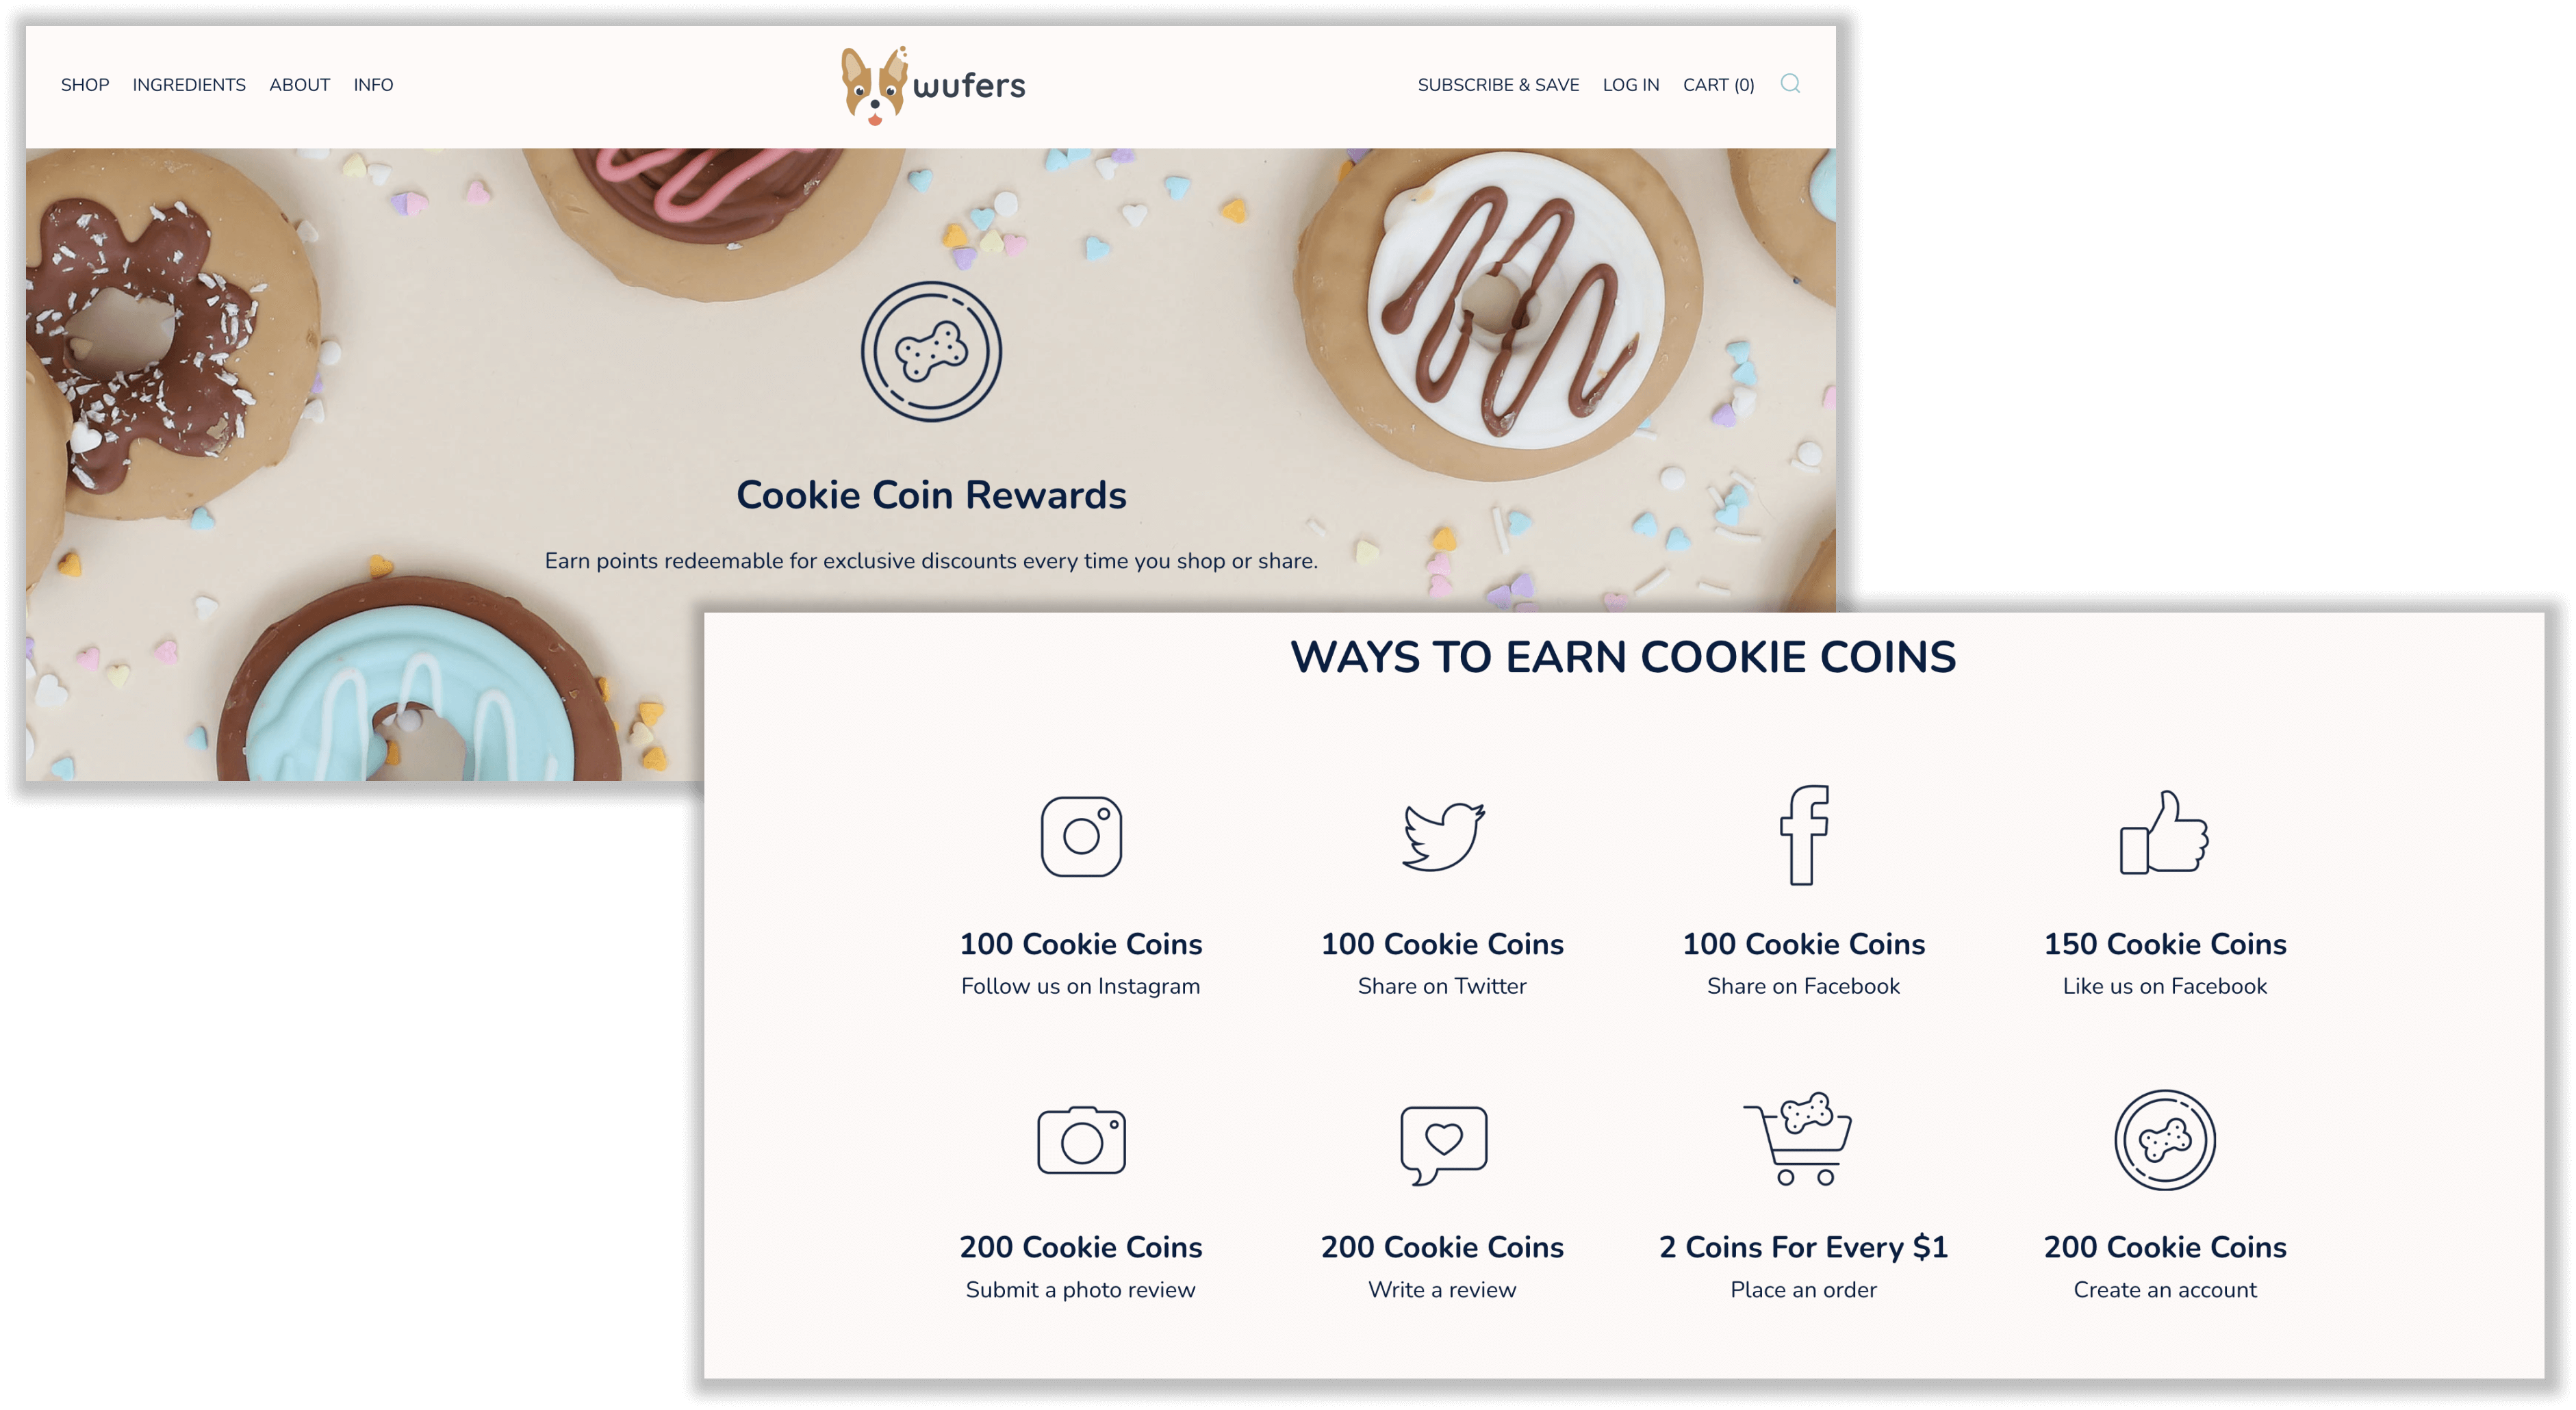 A screenshot from Wüfer’s rewards program explainer page overlapped with a graphic showing the different ways to earn points and the point values for each.